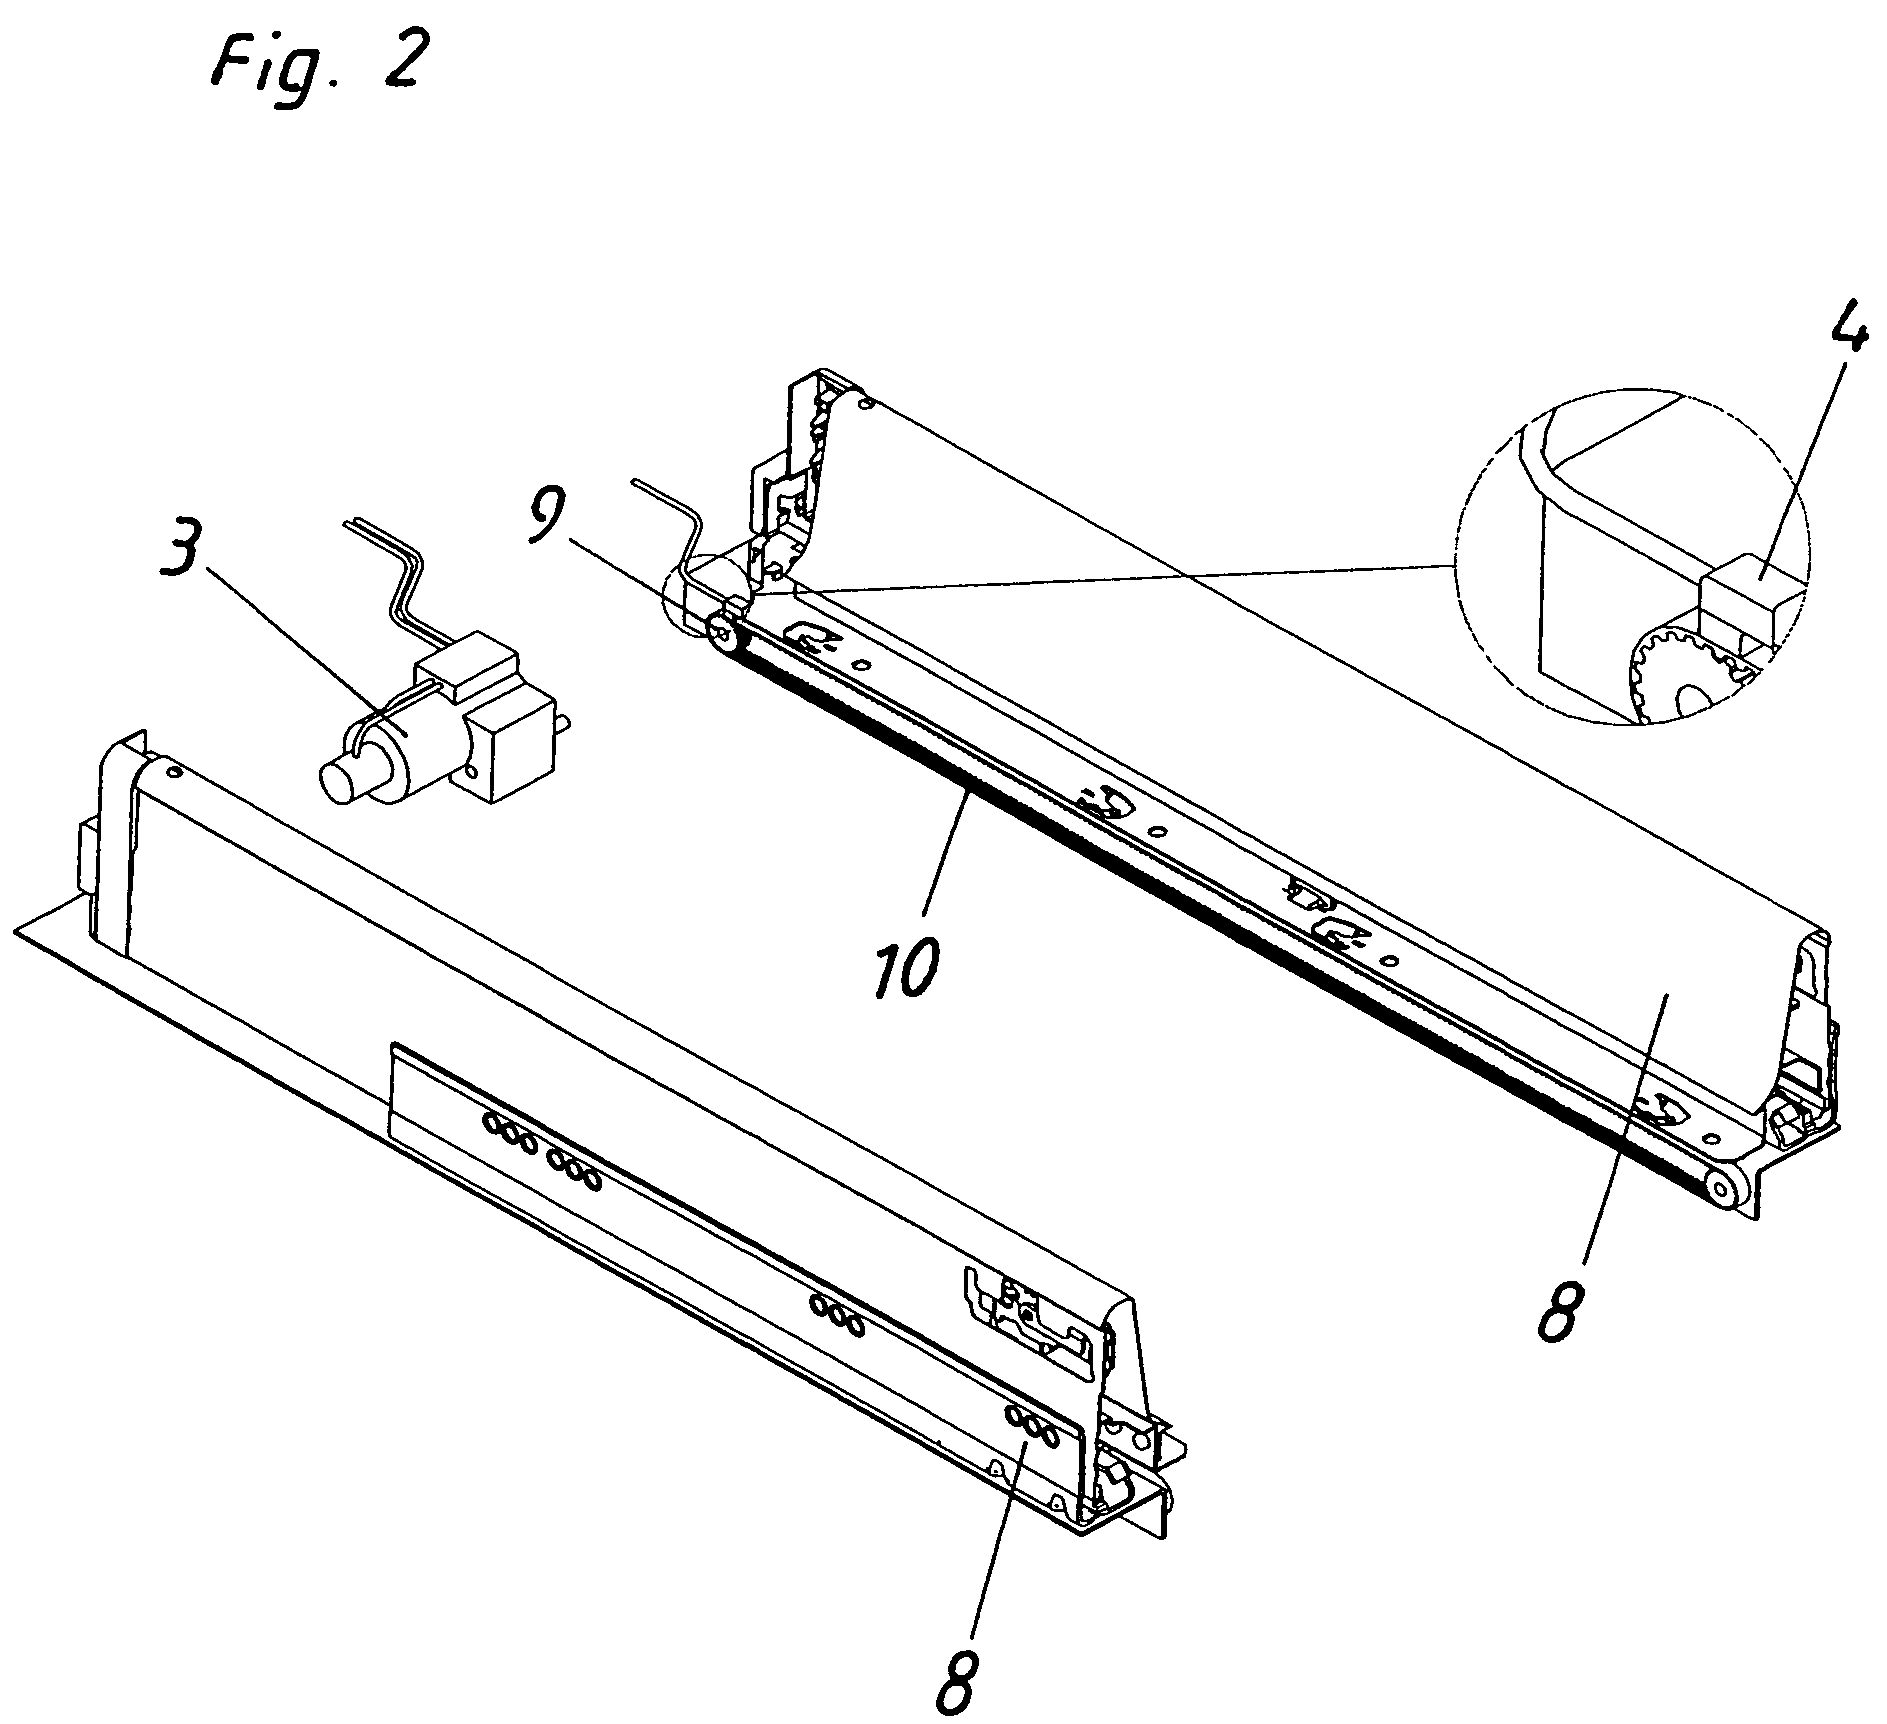 Procedure for driving a moveable part of an item of furniture